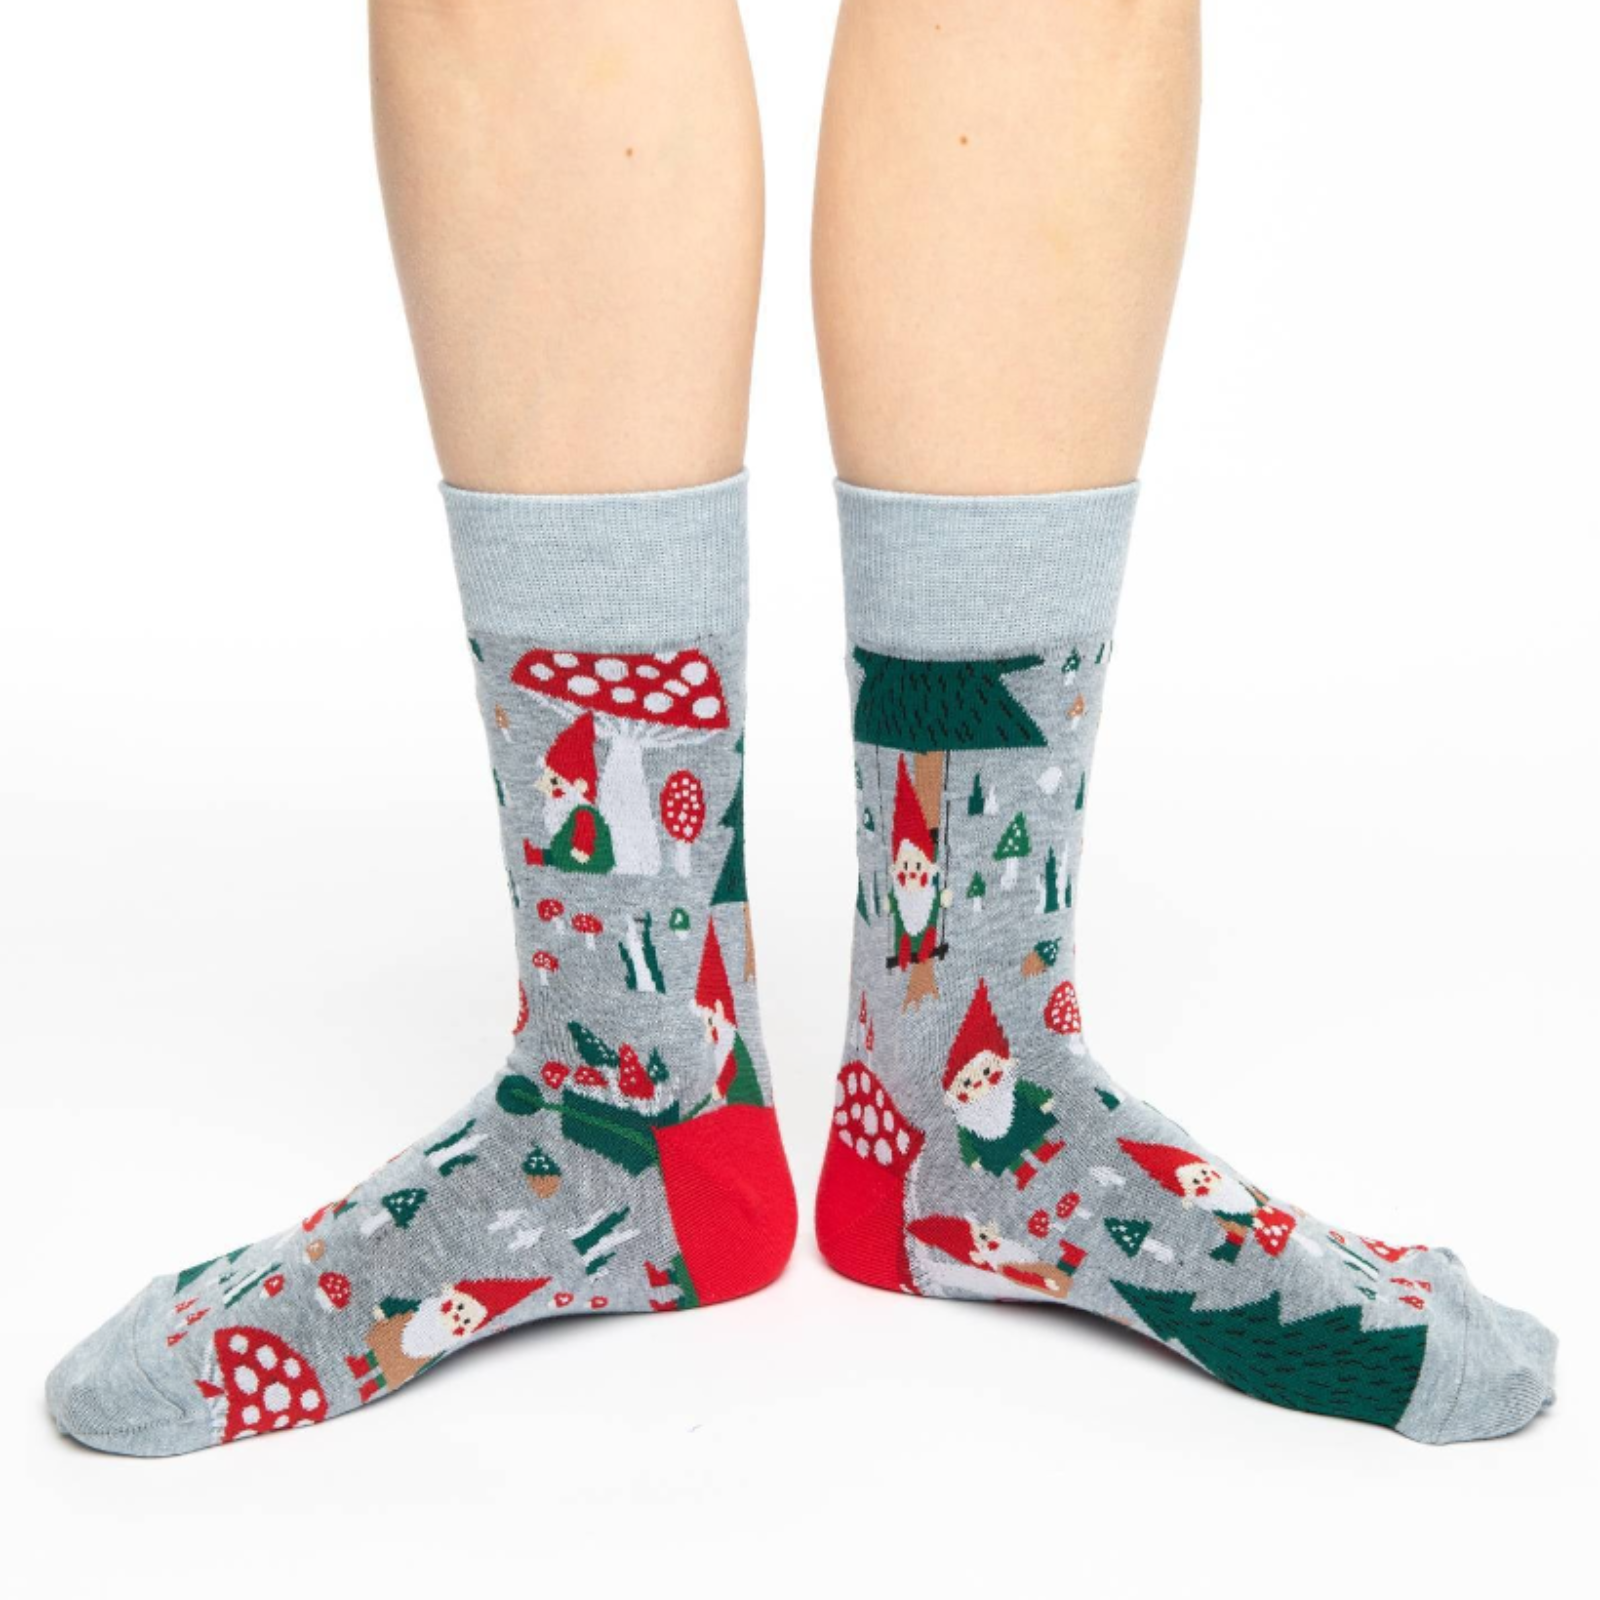 Good Luck Sock Woodland Gnomes women's and men's crew socks featuring gray sock with gnomes in red hats, mushrooms, and trees all over. Socks worn by female model. 